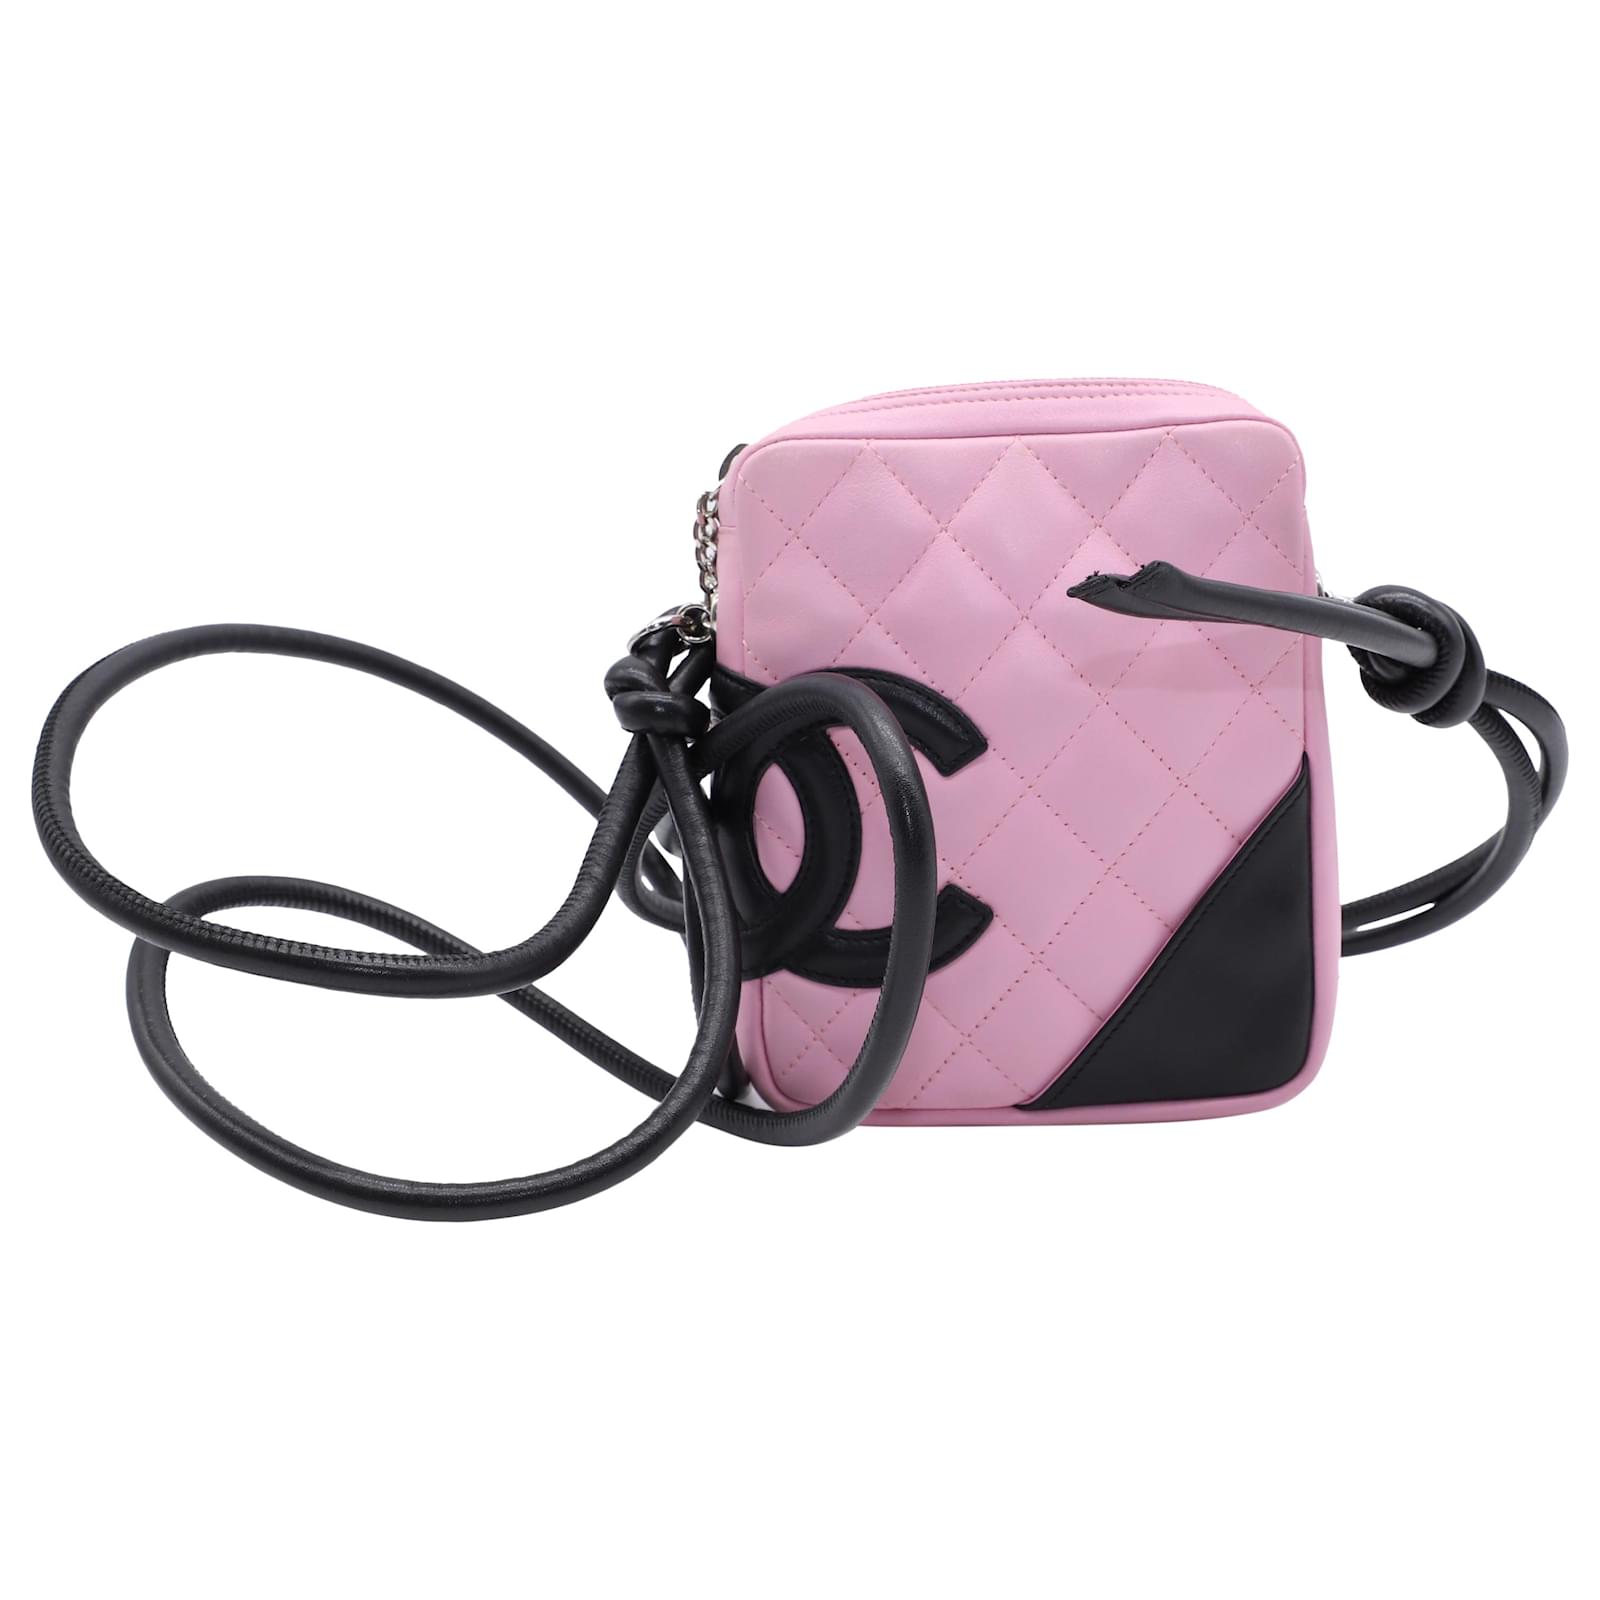 Chanel Quilted Cambon Cross Body Bag in Pink Leather